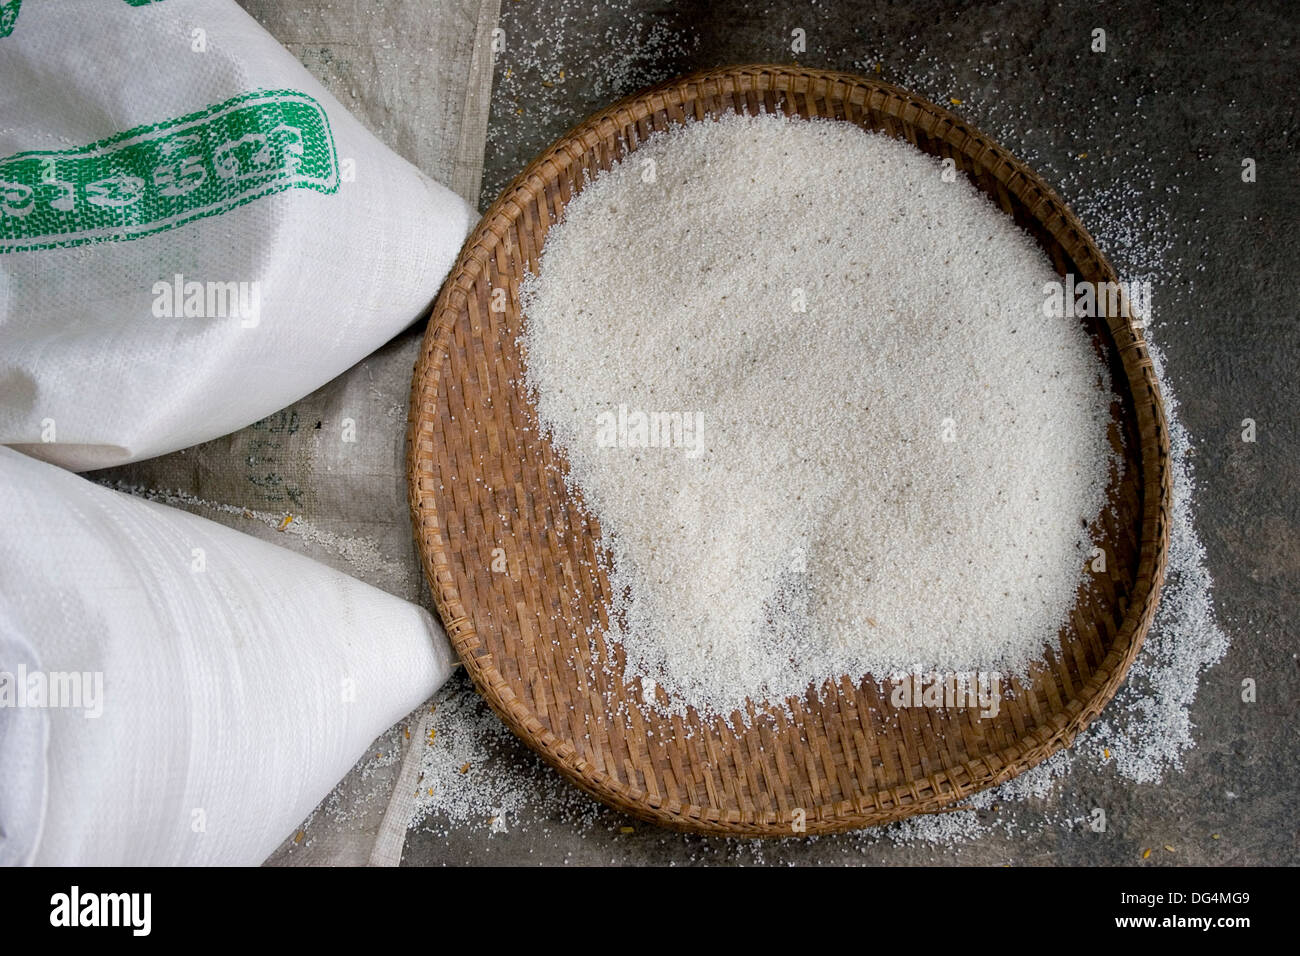 A basket filled with milled rice sits near rice bags at a rice store in Phnom Penh, Cambodia. Stock Photo